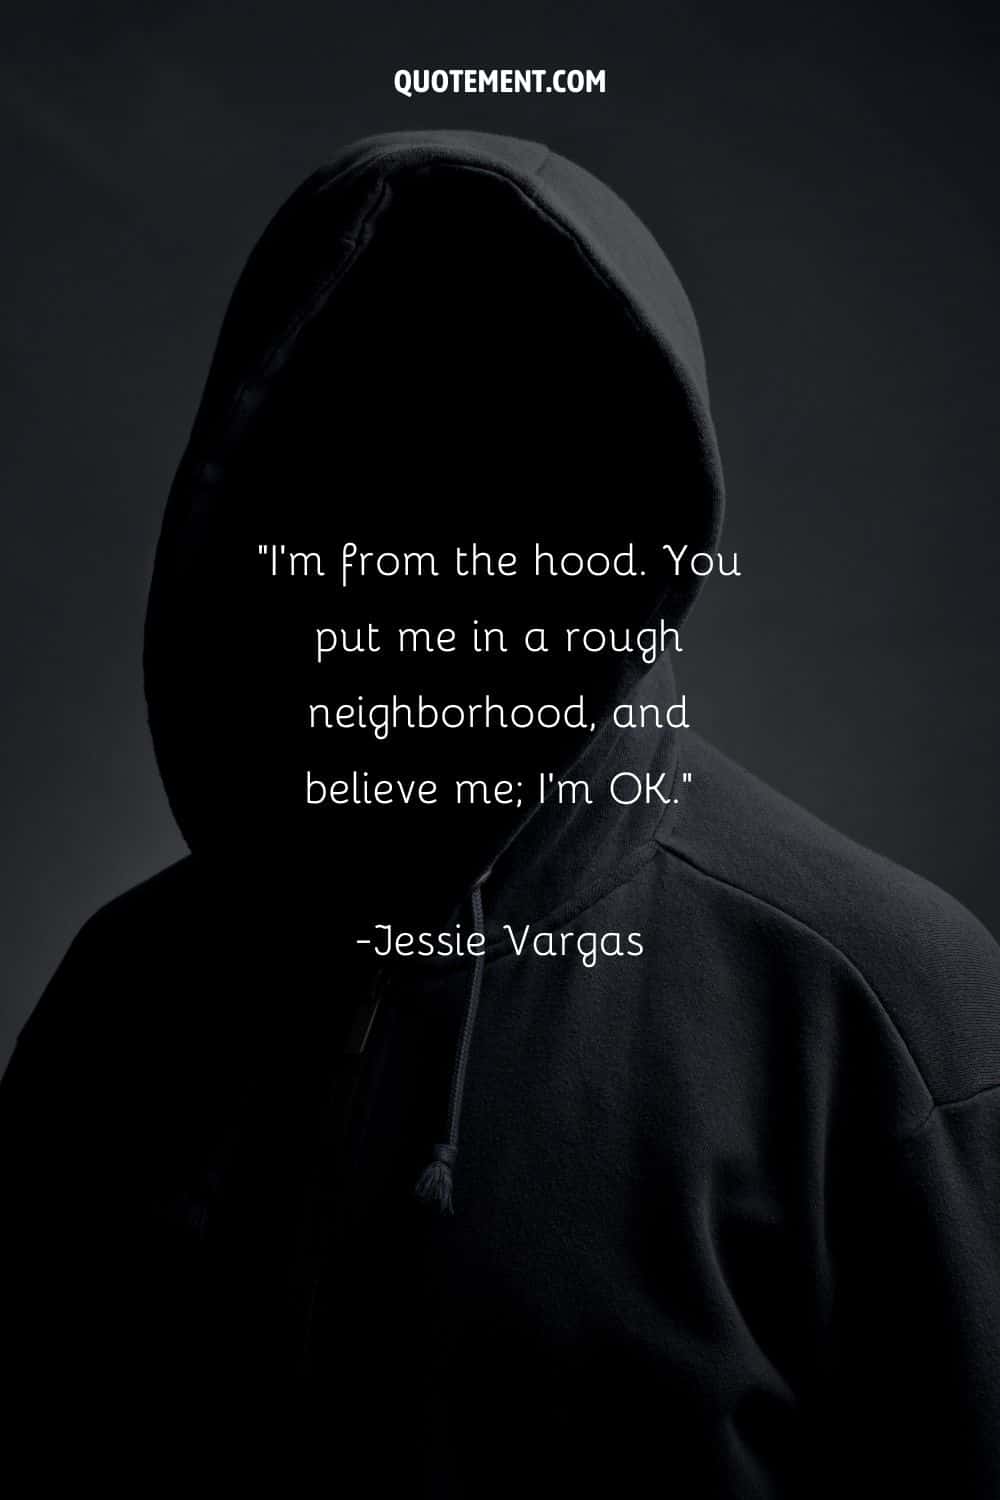 a dark image of a man wearing a hoodie representing the best quote about the hood